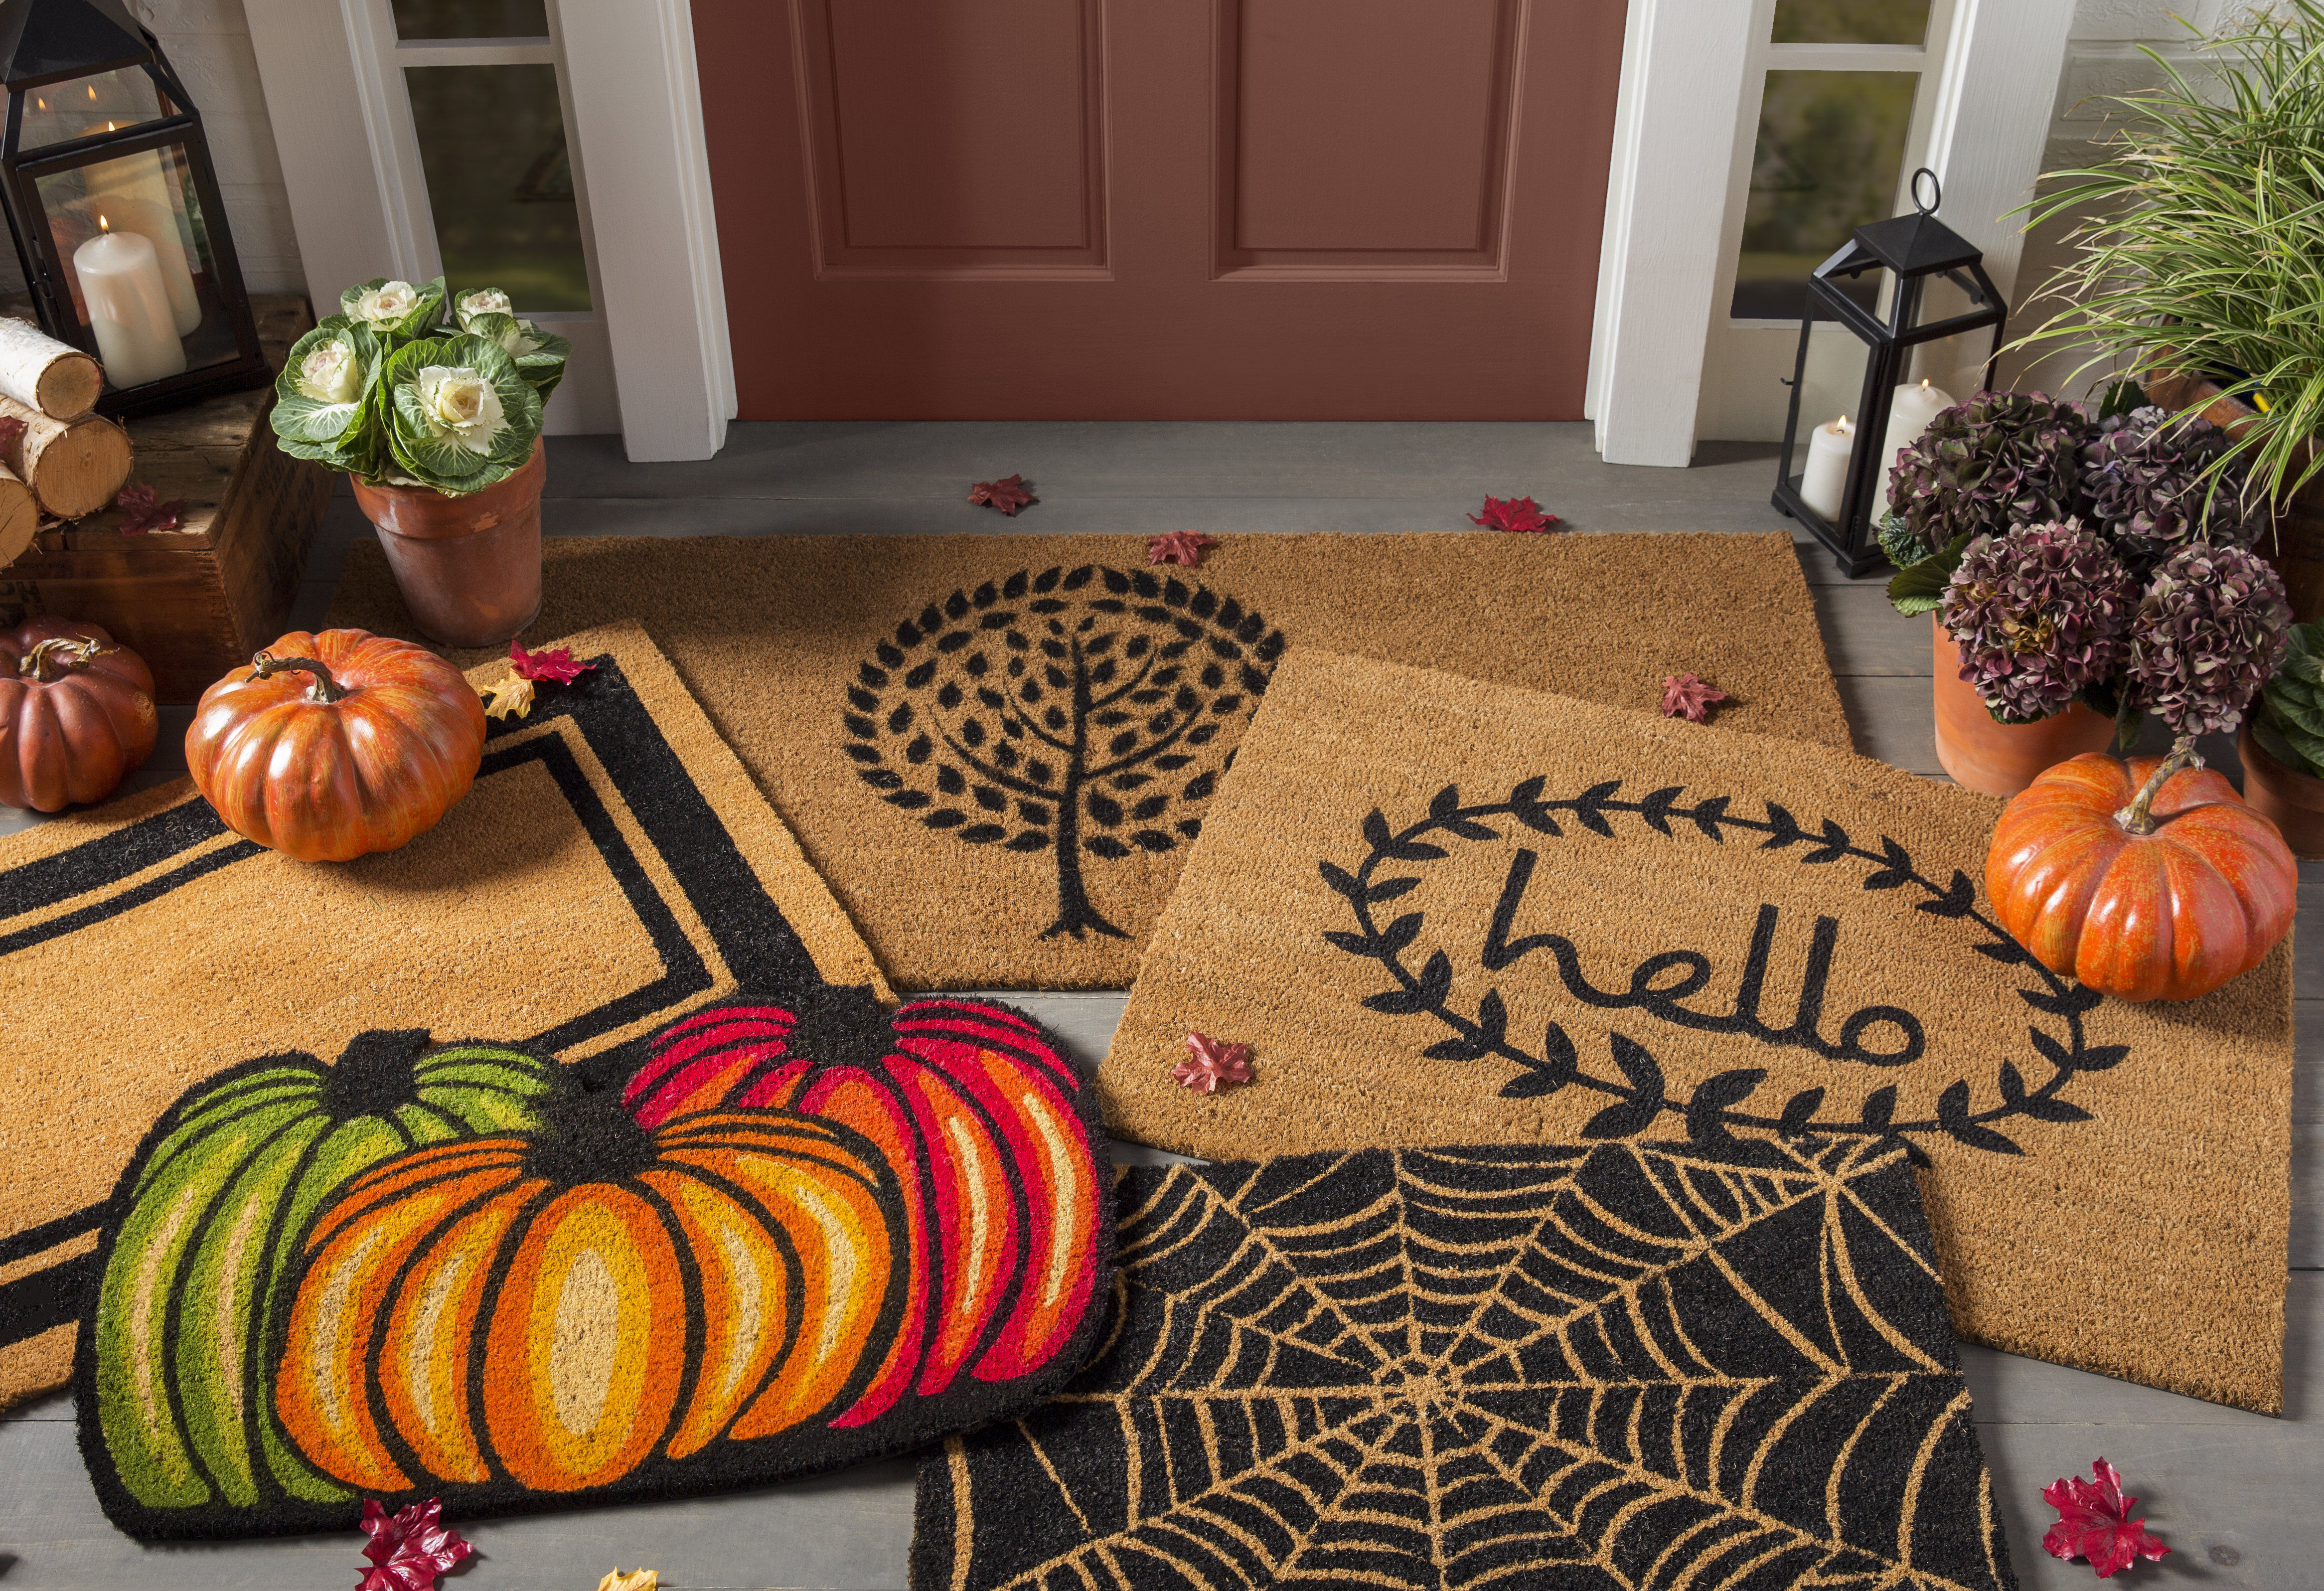 Halloween-themed doormats layered atop each other